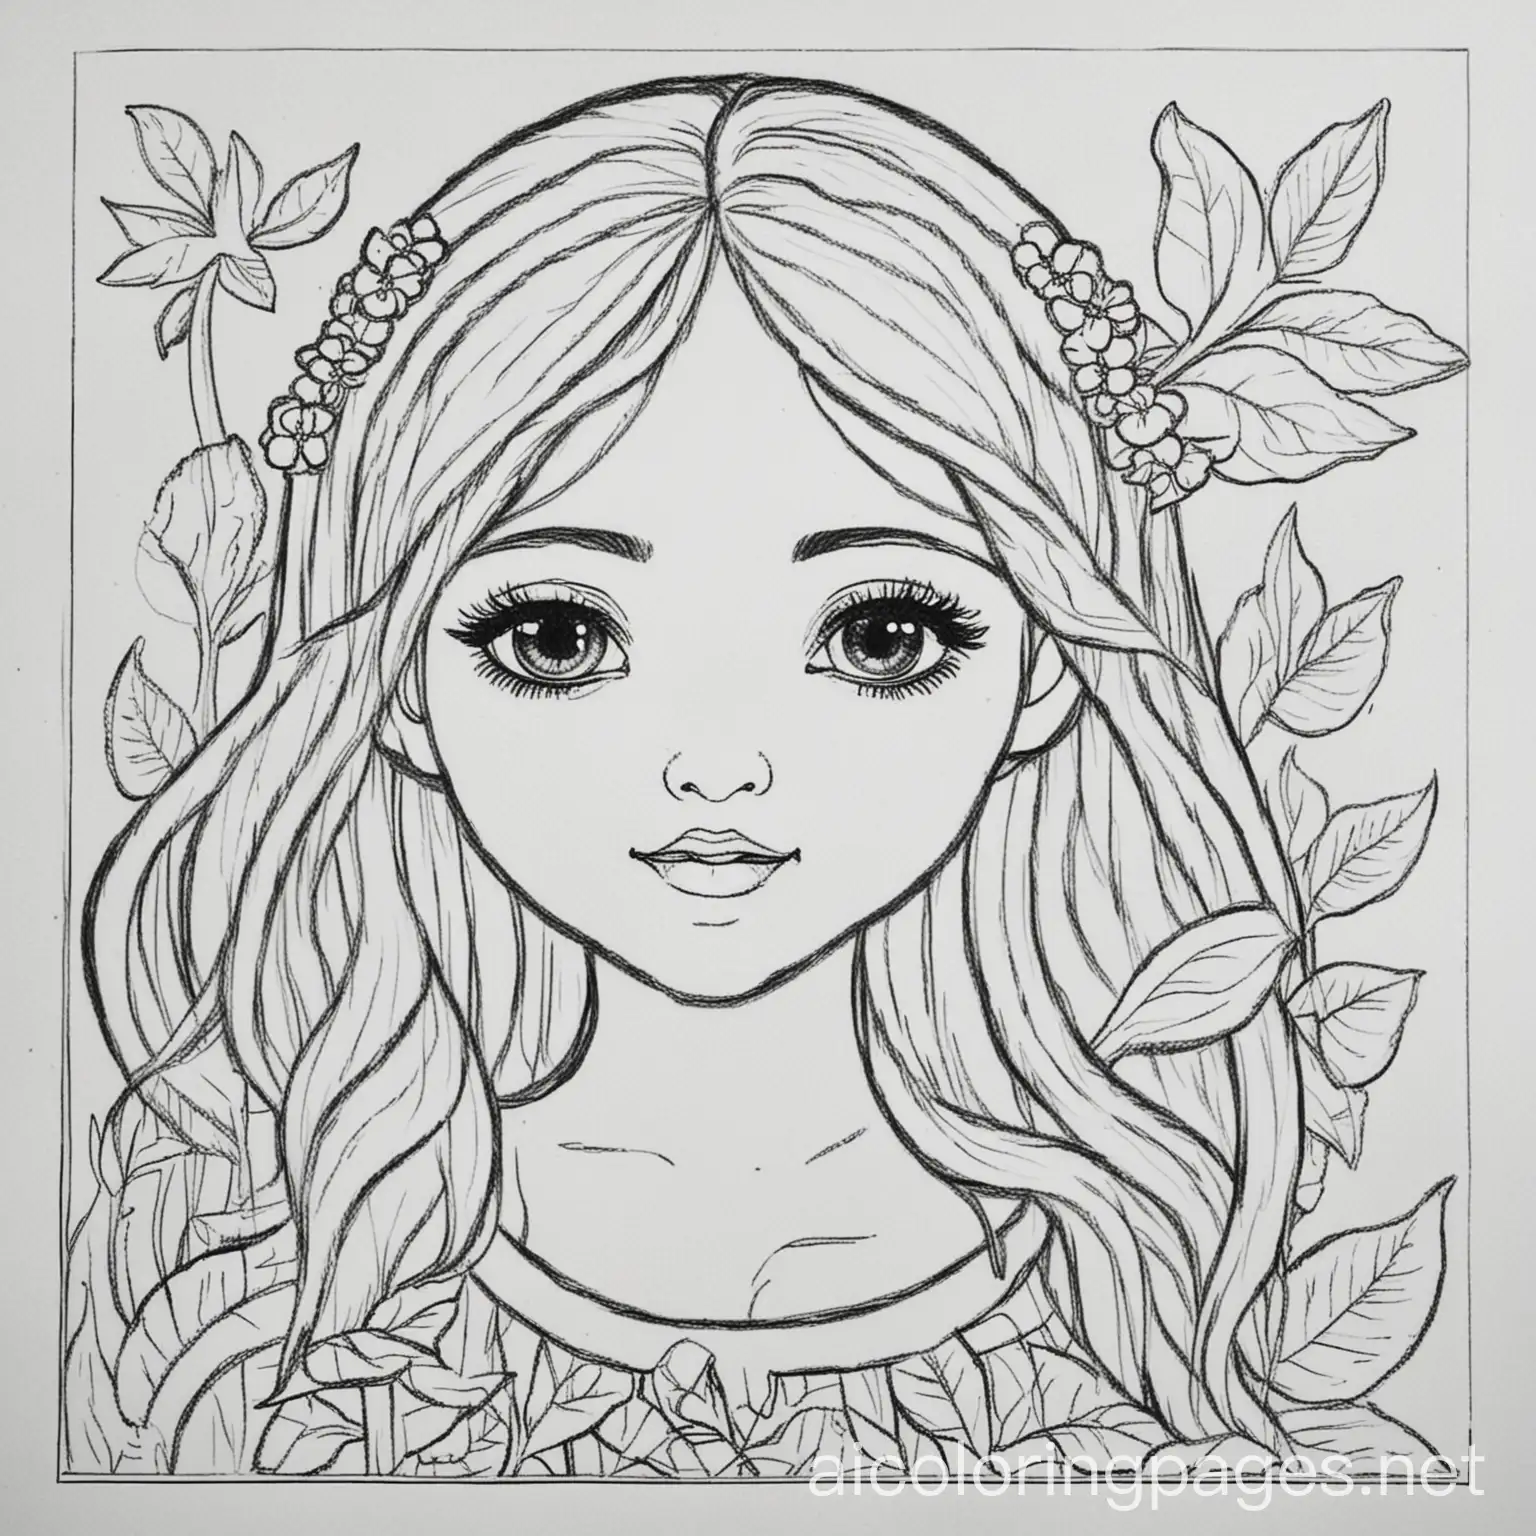 Children's coloring book. Make sure it is black and white, simple, has clear outlines, and has plenty of space for coloring. Avoid shading; the image should be pure black and white line art, Coloring Page, black and white, line art, white background, Simplicity, Ample White Space. The background of the coloring page is plain white to make it easy for young children to color within the lines. The outlines of all the subjects are easy to distinguish, making it simple for kids to color without too much difficulty